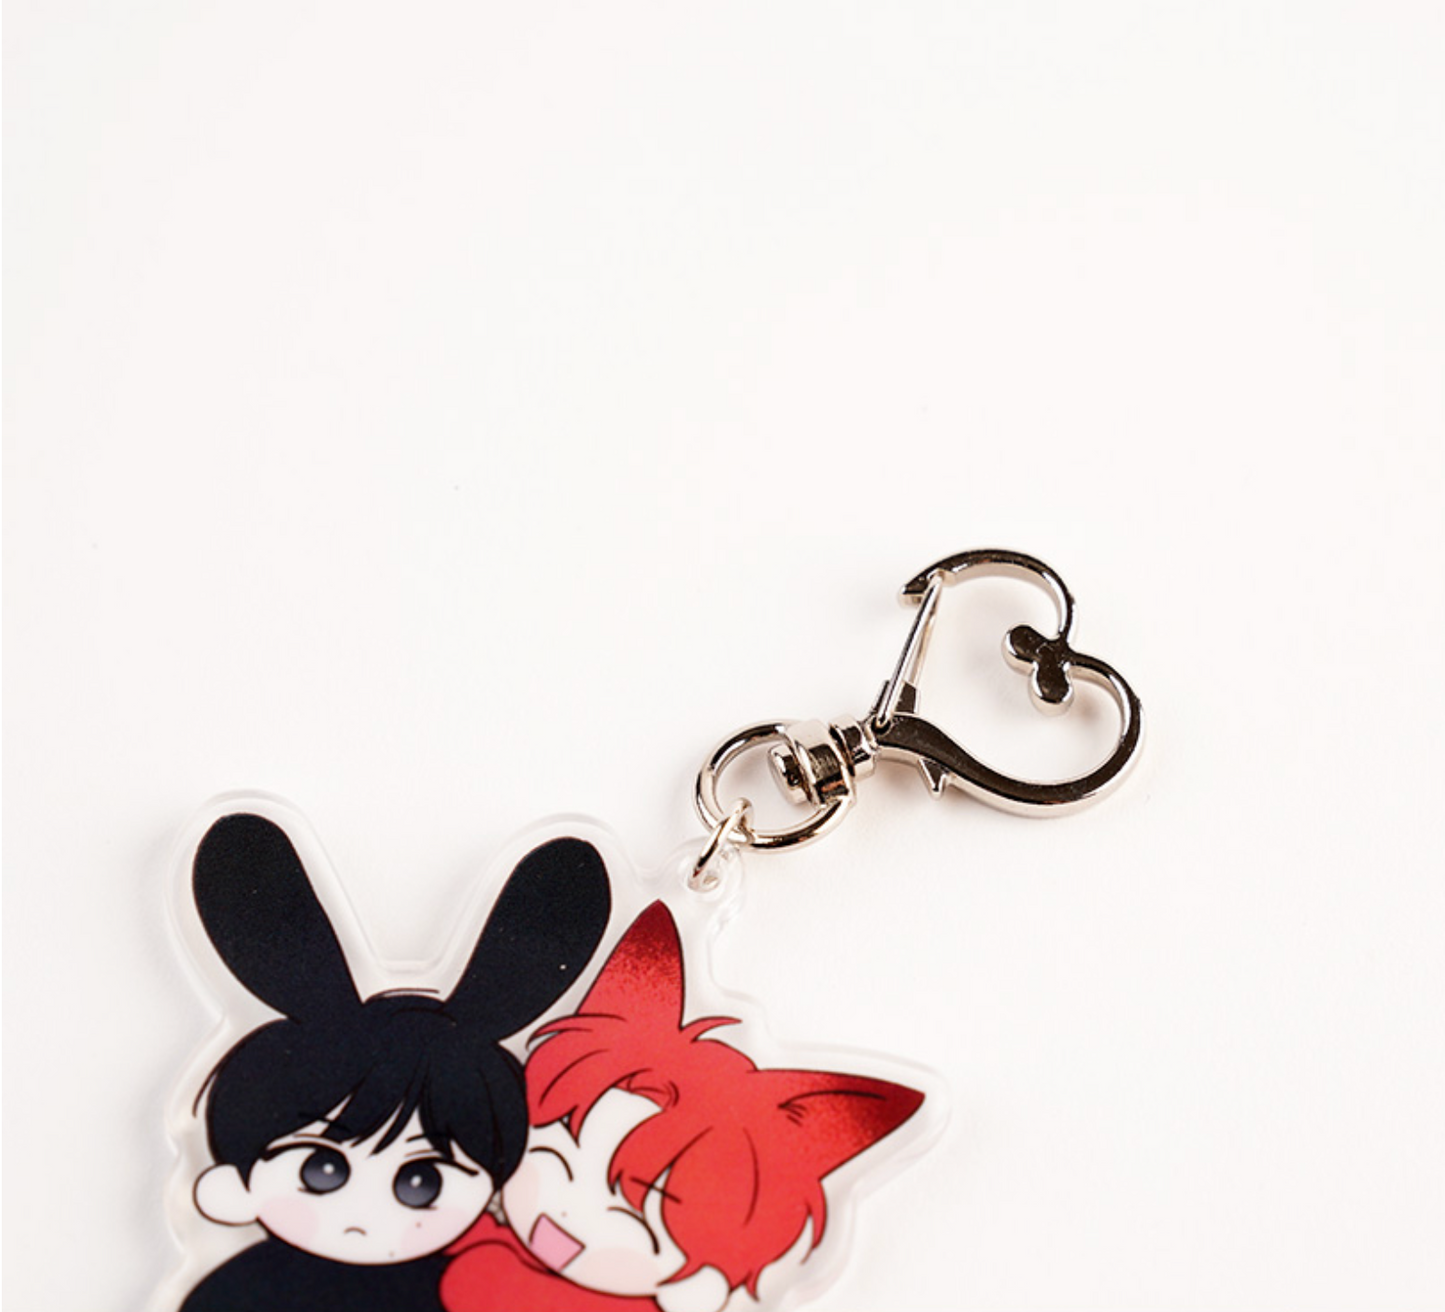 Author White eared Acrylic Keychains : It’s Just a Dream. Right?!, From points of three(三つの点)